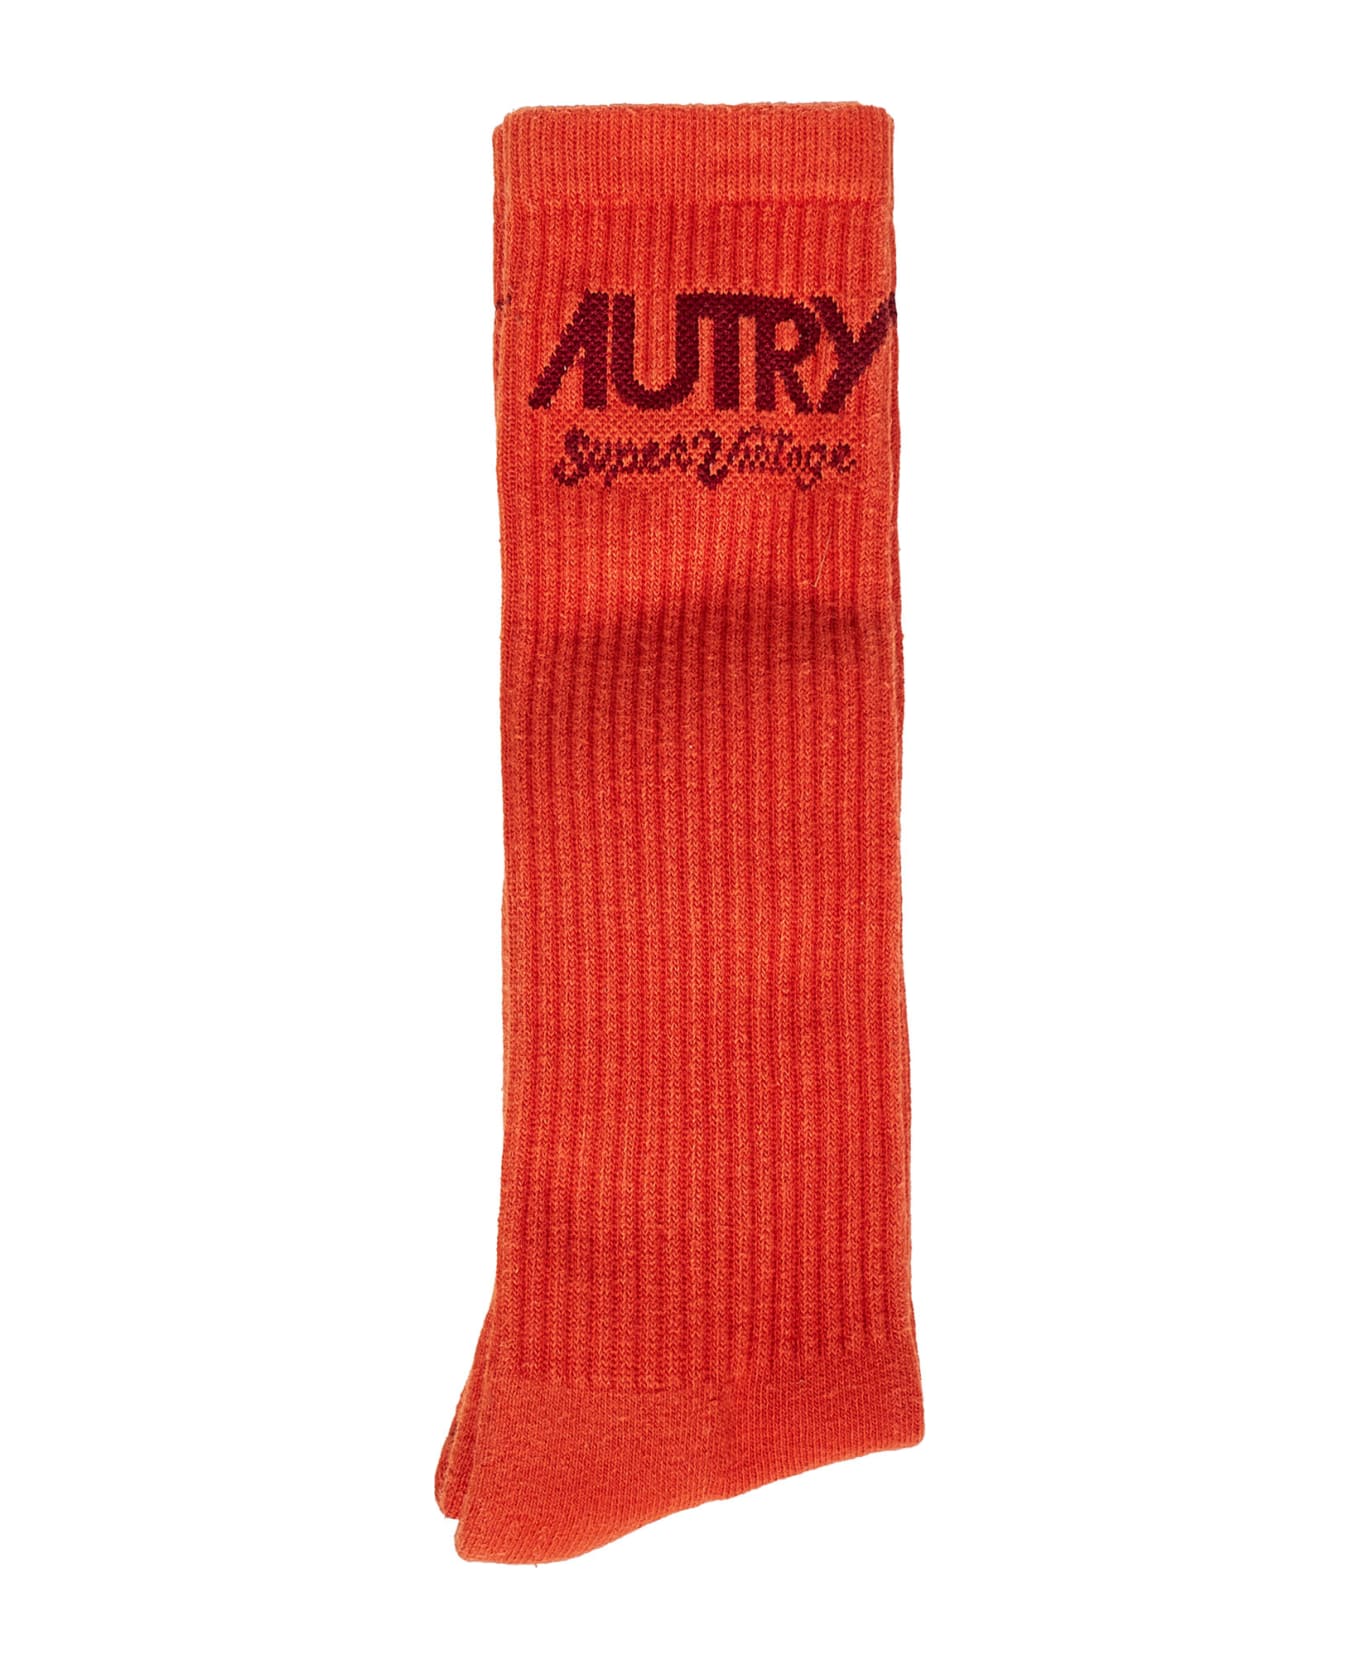 Autry Supervintage Socks - Tinto orng 靴下